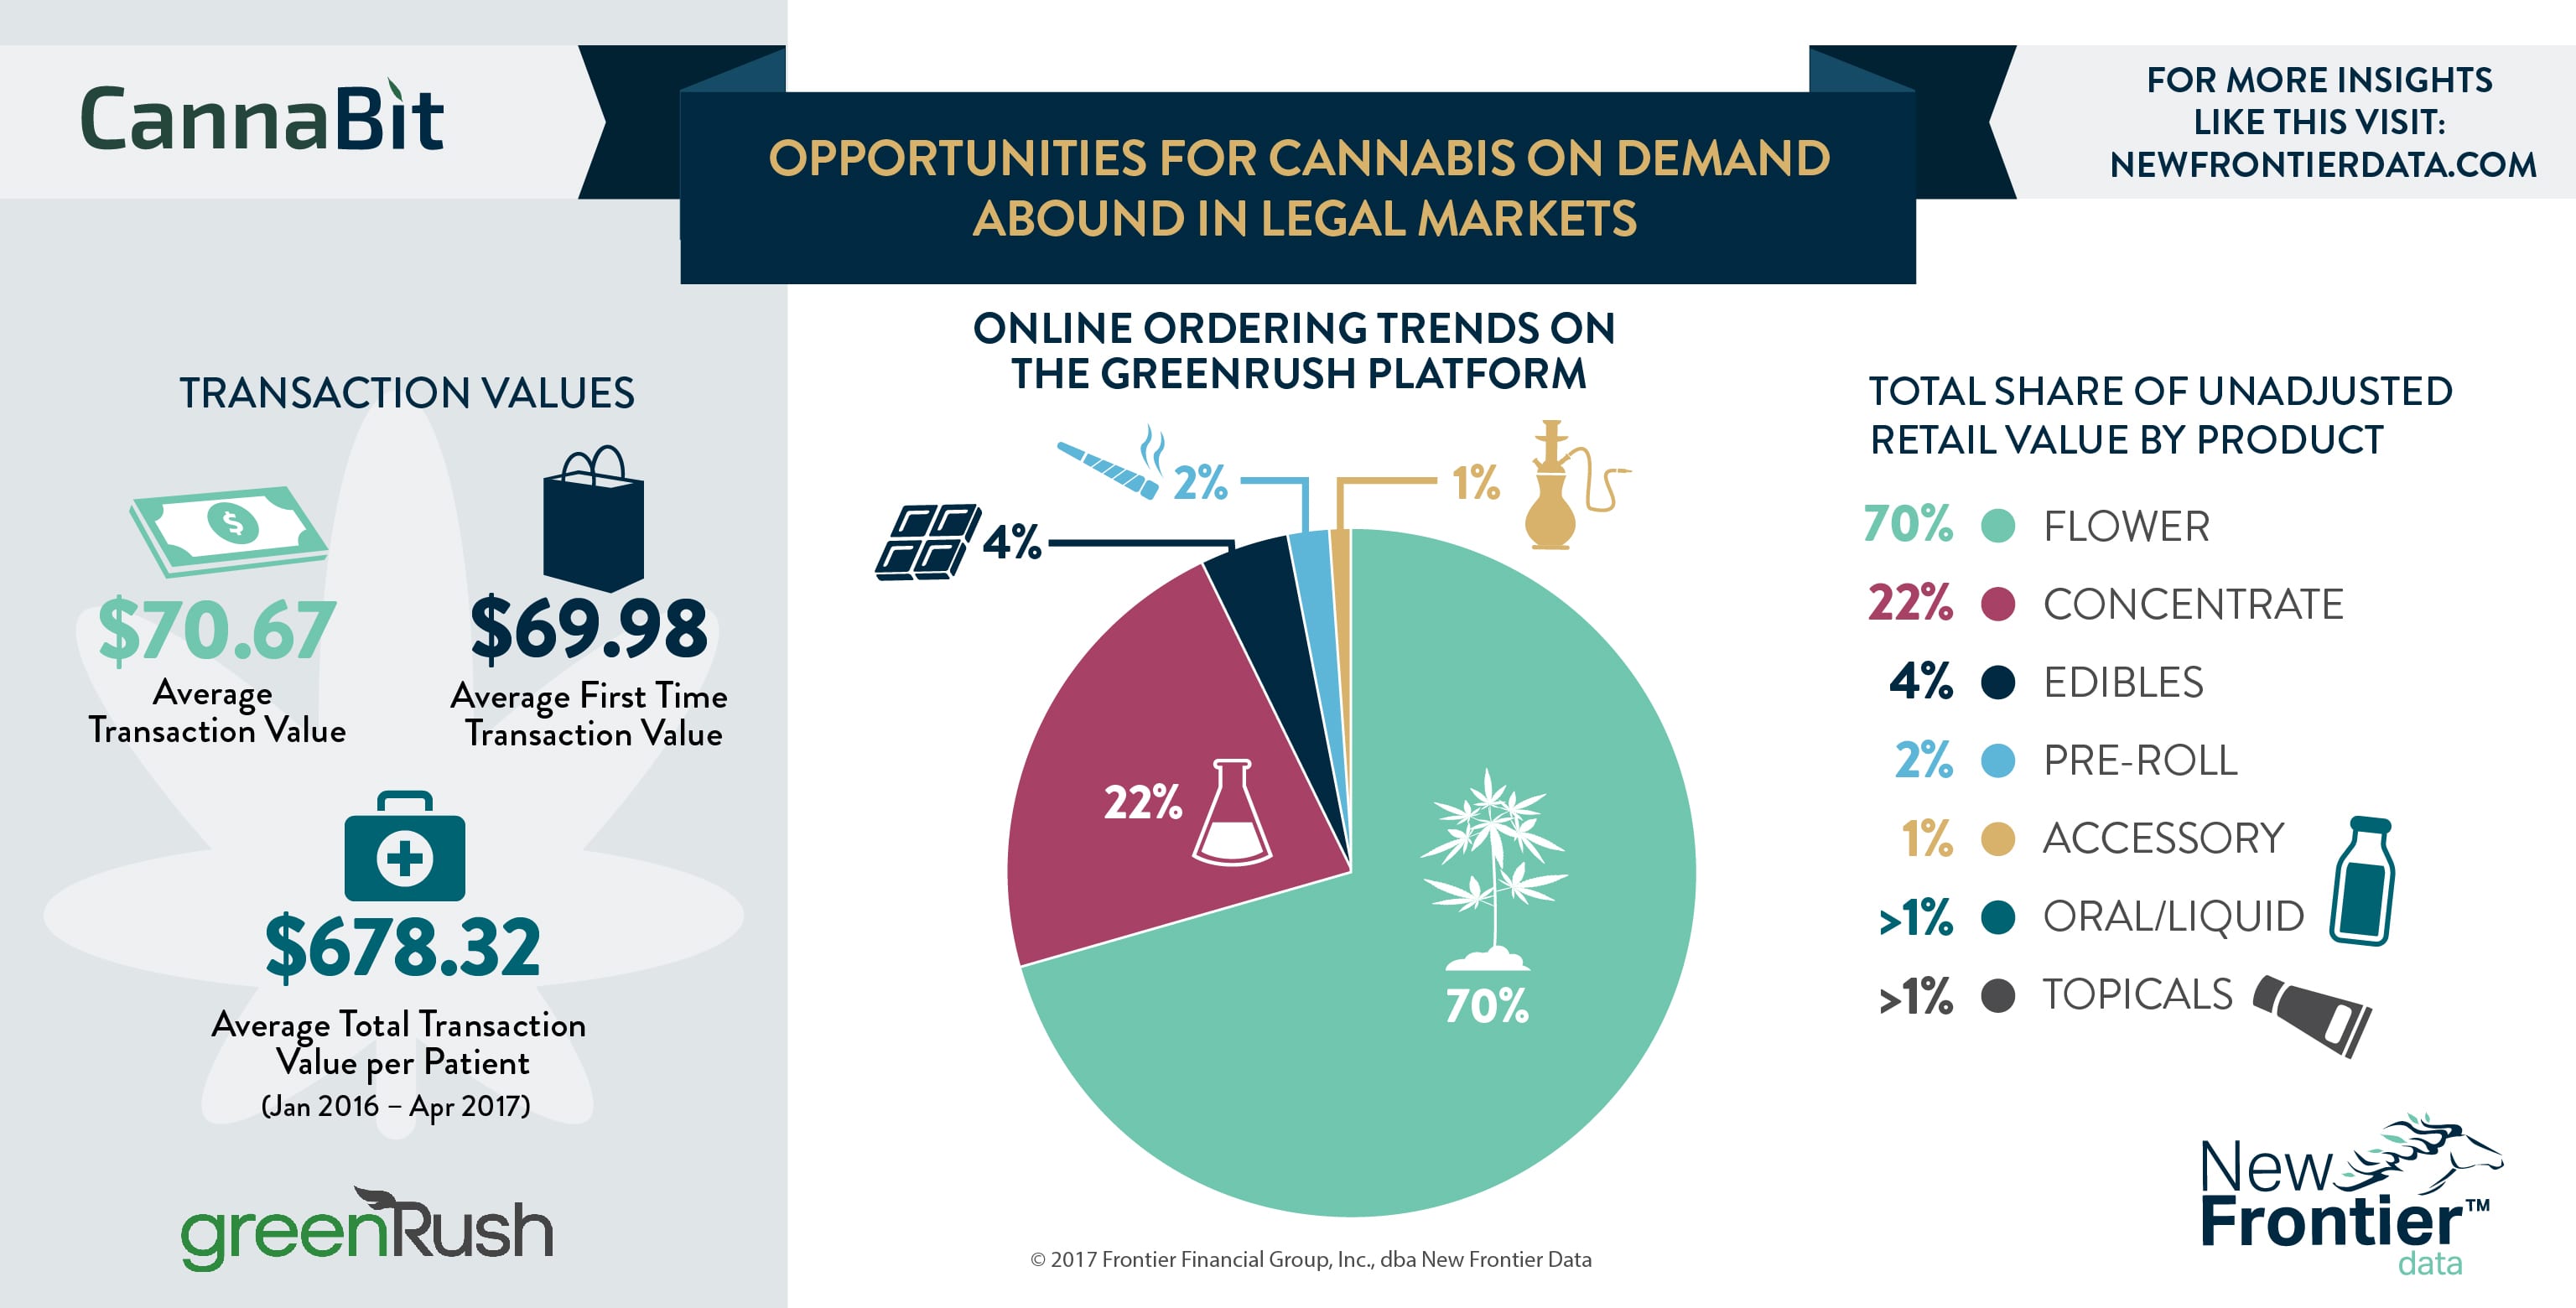 Cannabit: Opportunities for Cannabis on Demand Abound in Legal Markets / 08202017